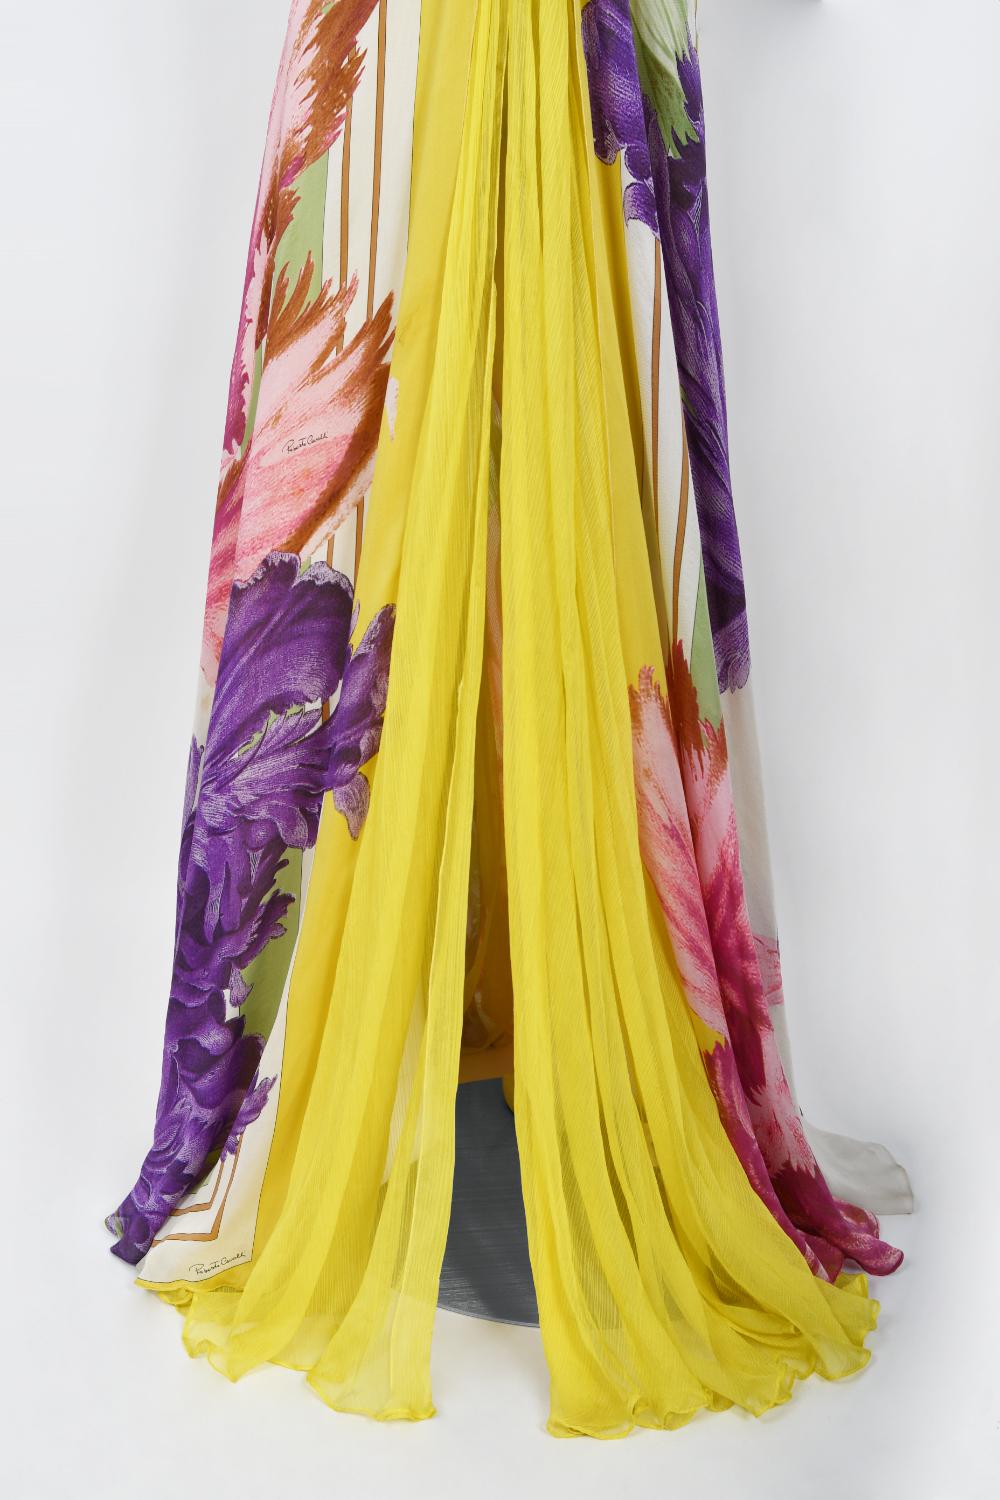 Rare 2005 Roberto Cavalli Large-Scale Floral Silk Bustier High-Slit Gown & Shawl For Sale 4